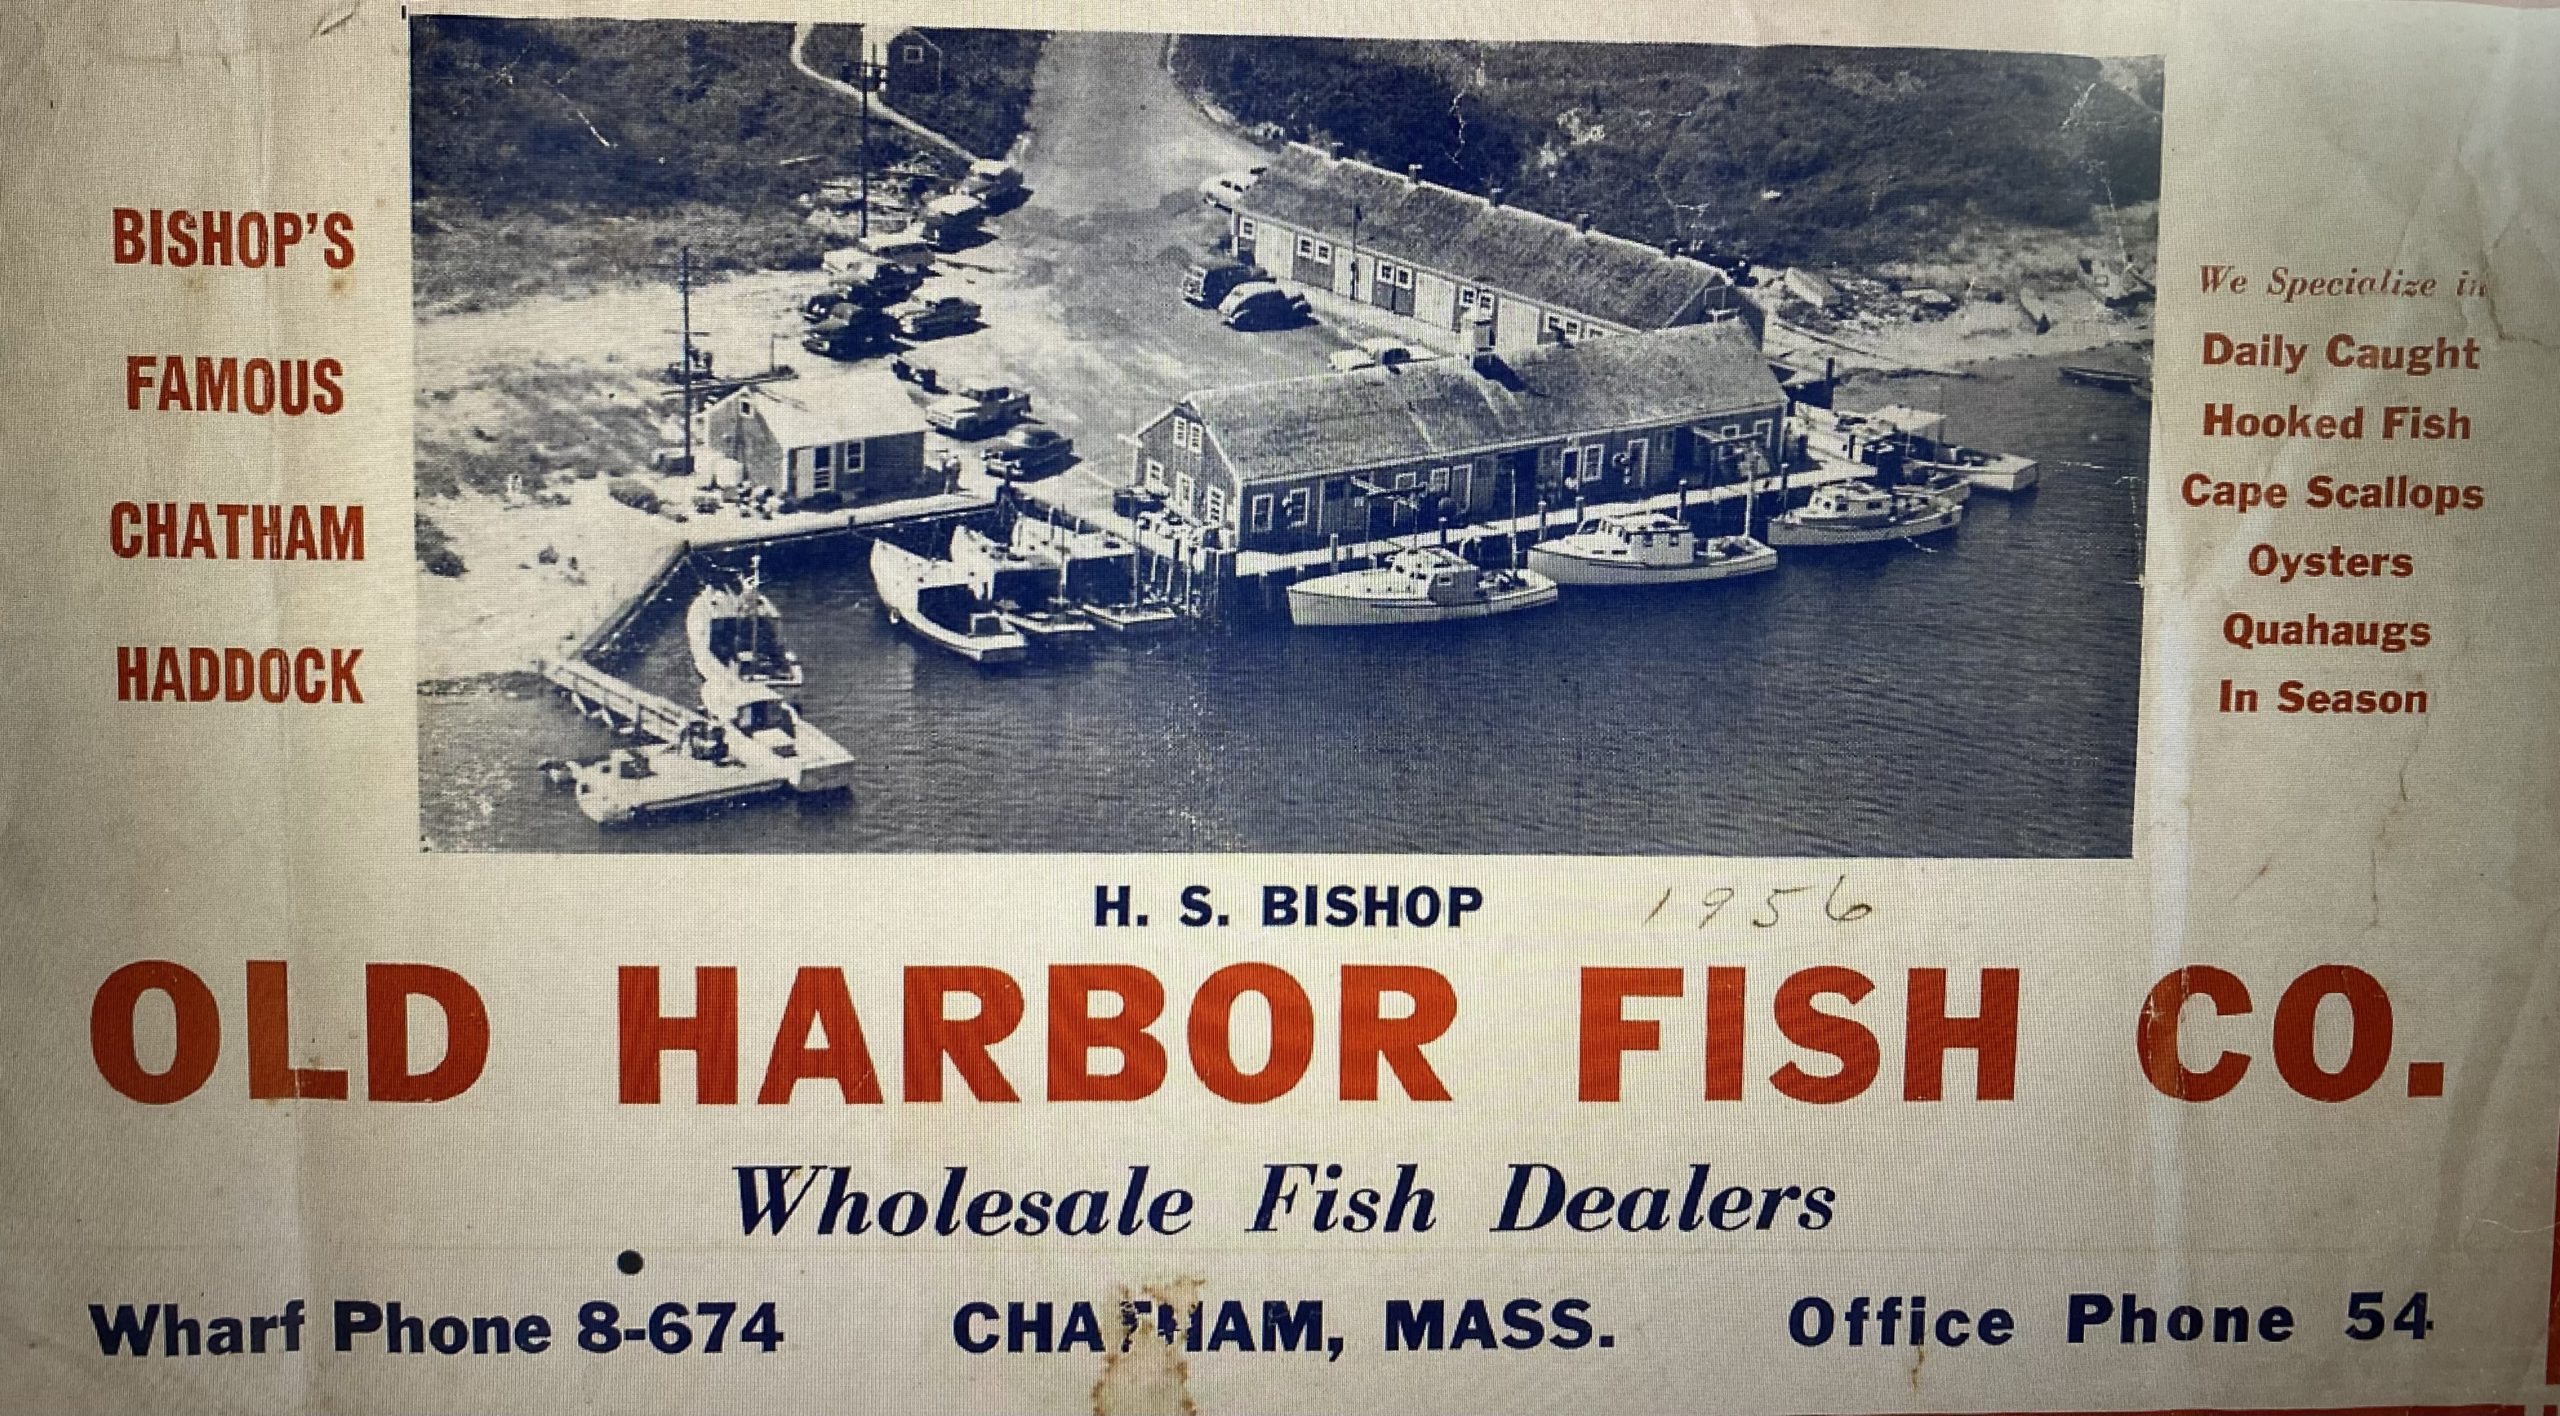 THE STORY OF OLD HARBOR FISH CO.